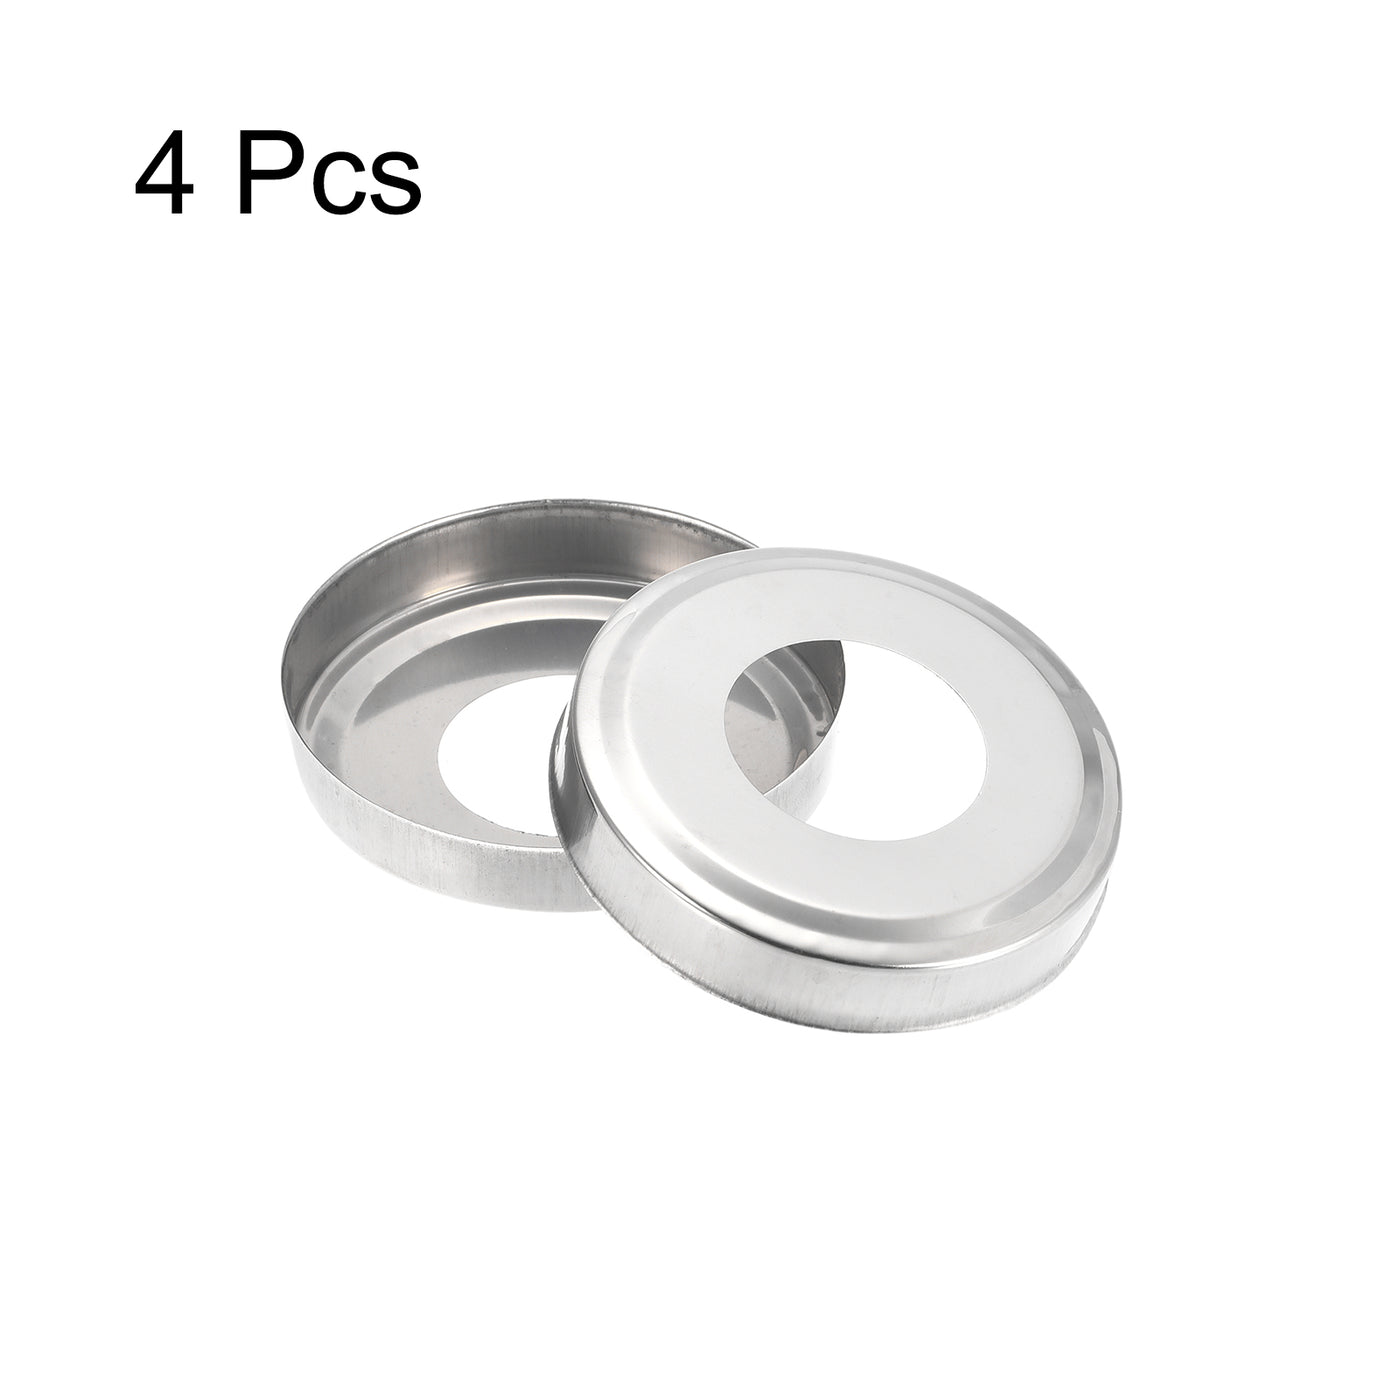 Uxcell Uxcell Round Escutcheon Plate, 4pcs 85.5 x 12.5mm 201 Stainless Steel Water Pipe Cover for 48.5mm Diameter Pipe